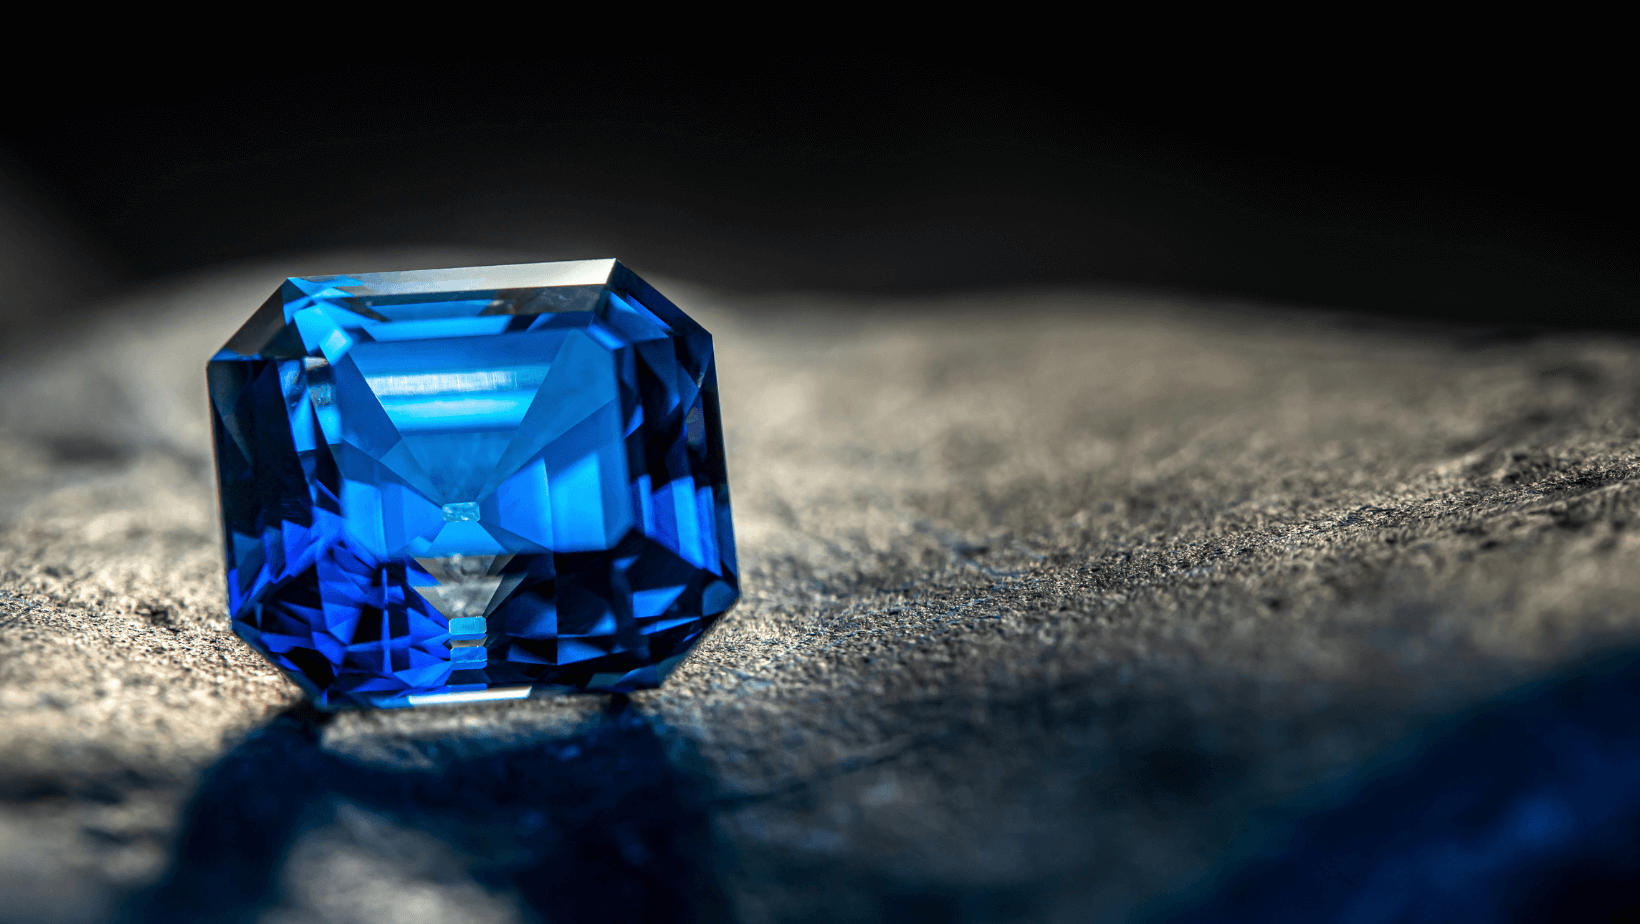 What is September's birthstone?